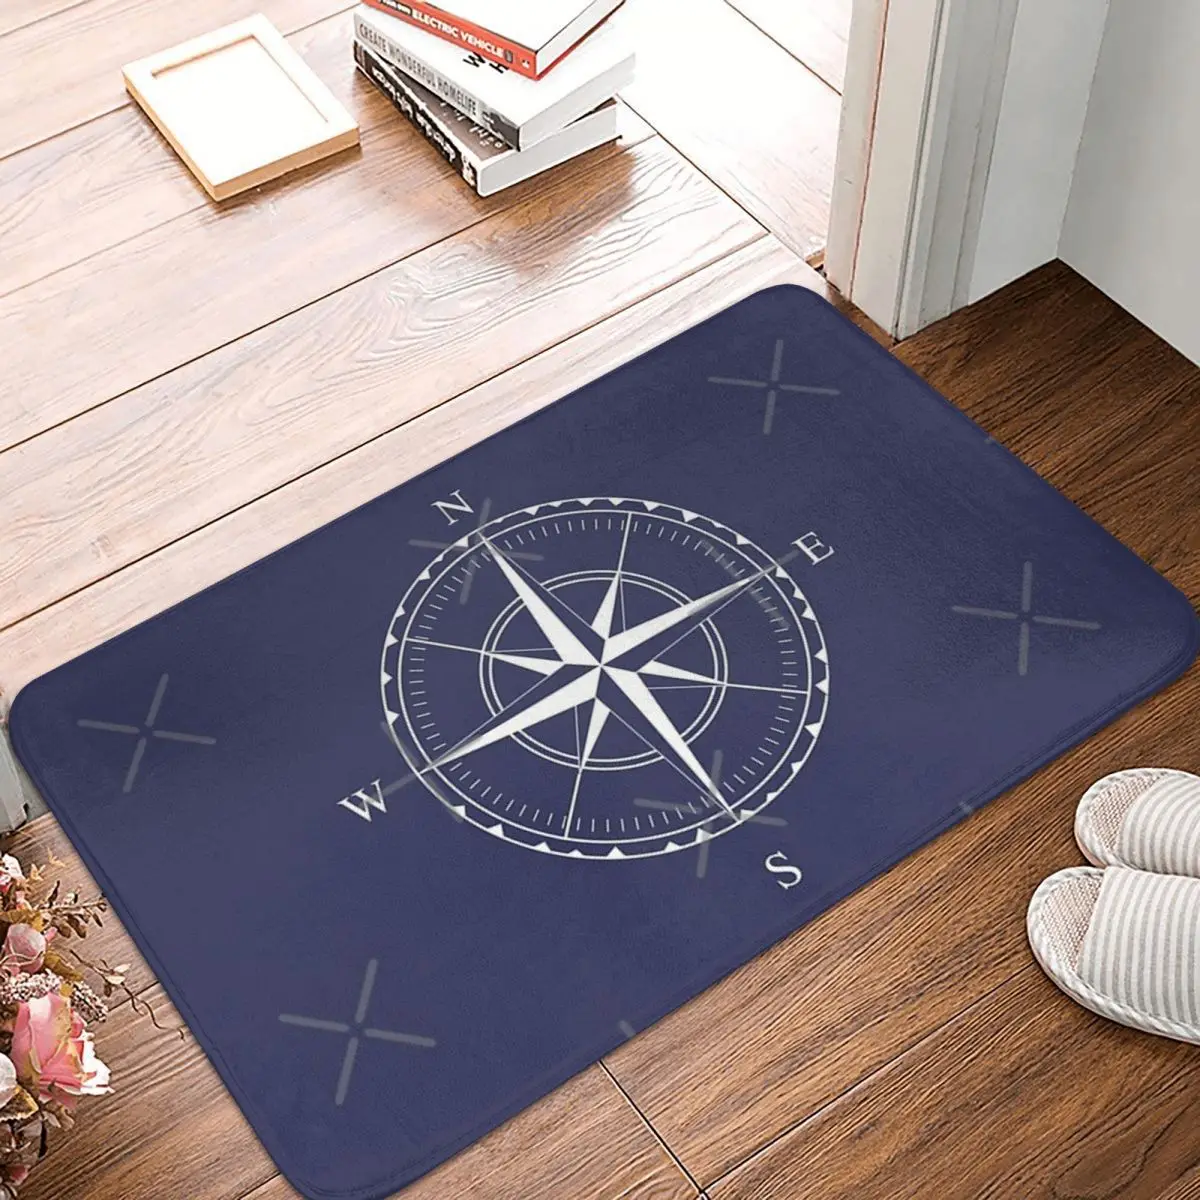 

Navy Blue And White Nautical Ships Compass Rose 60x40cm Carpet Polyester Floor Mats Modern Practical Indoor